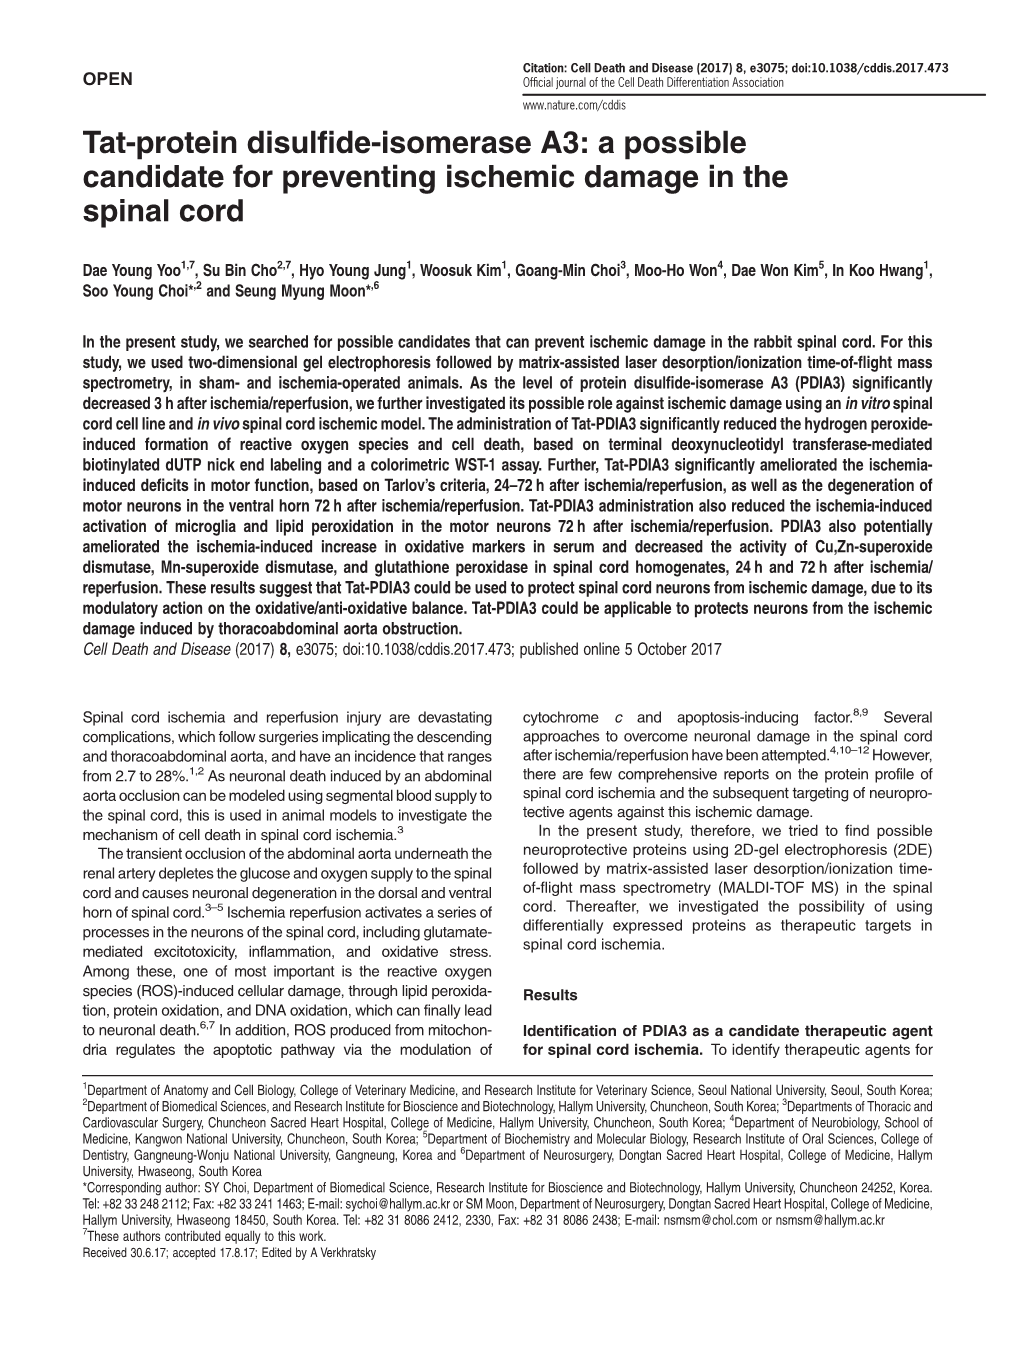 Tat-Protein Disulfide-Isomerase A3: a Possible Candidate for Preventing Ischemic Damage in the Spinal Cord